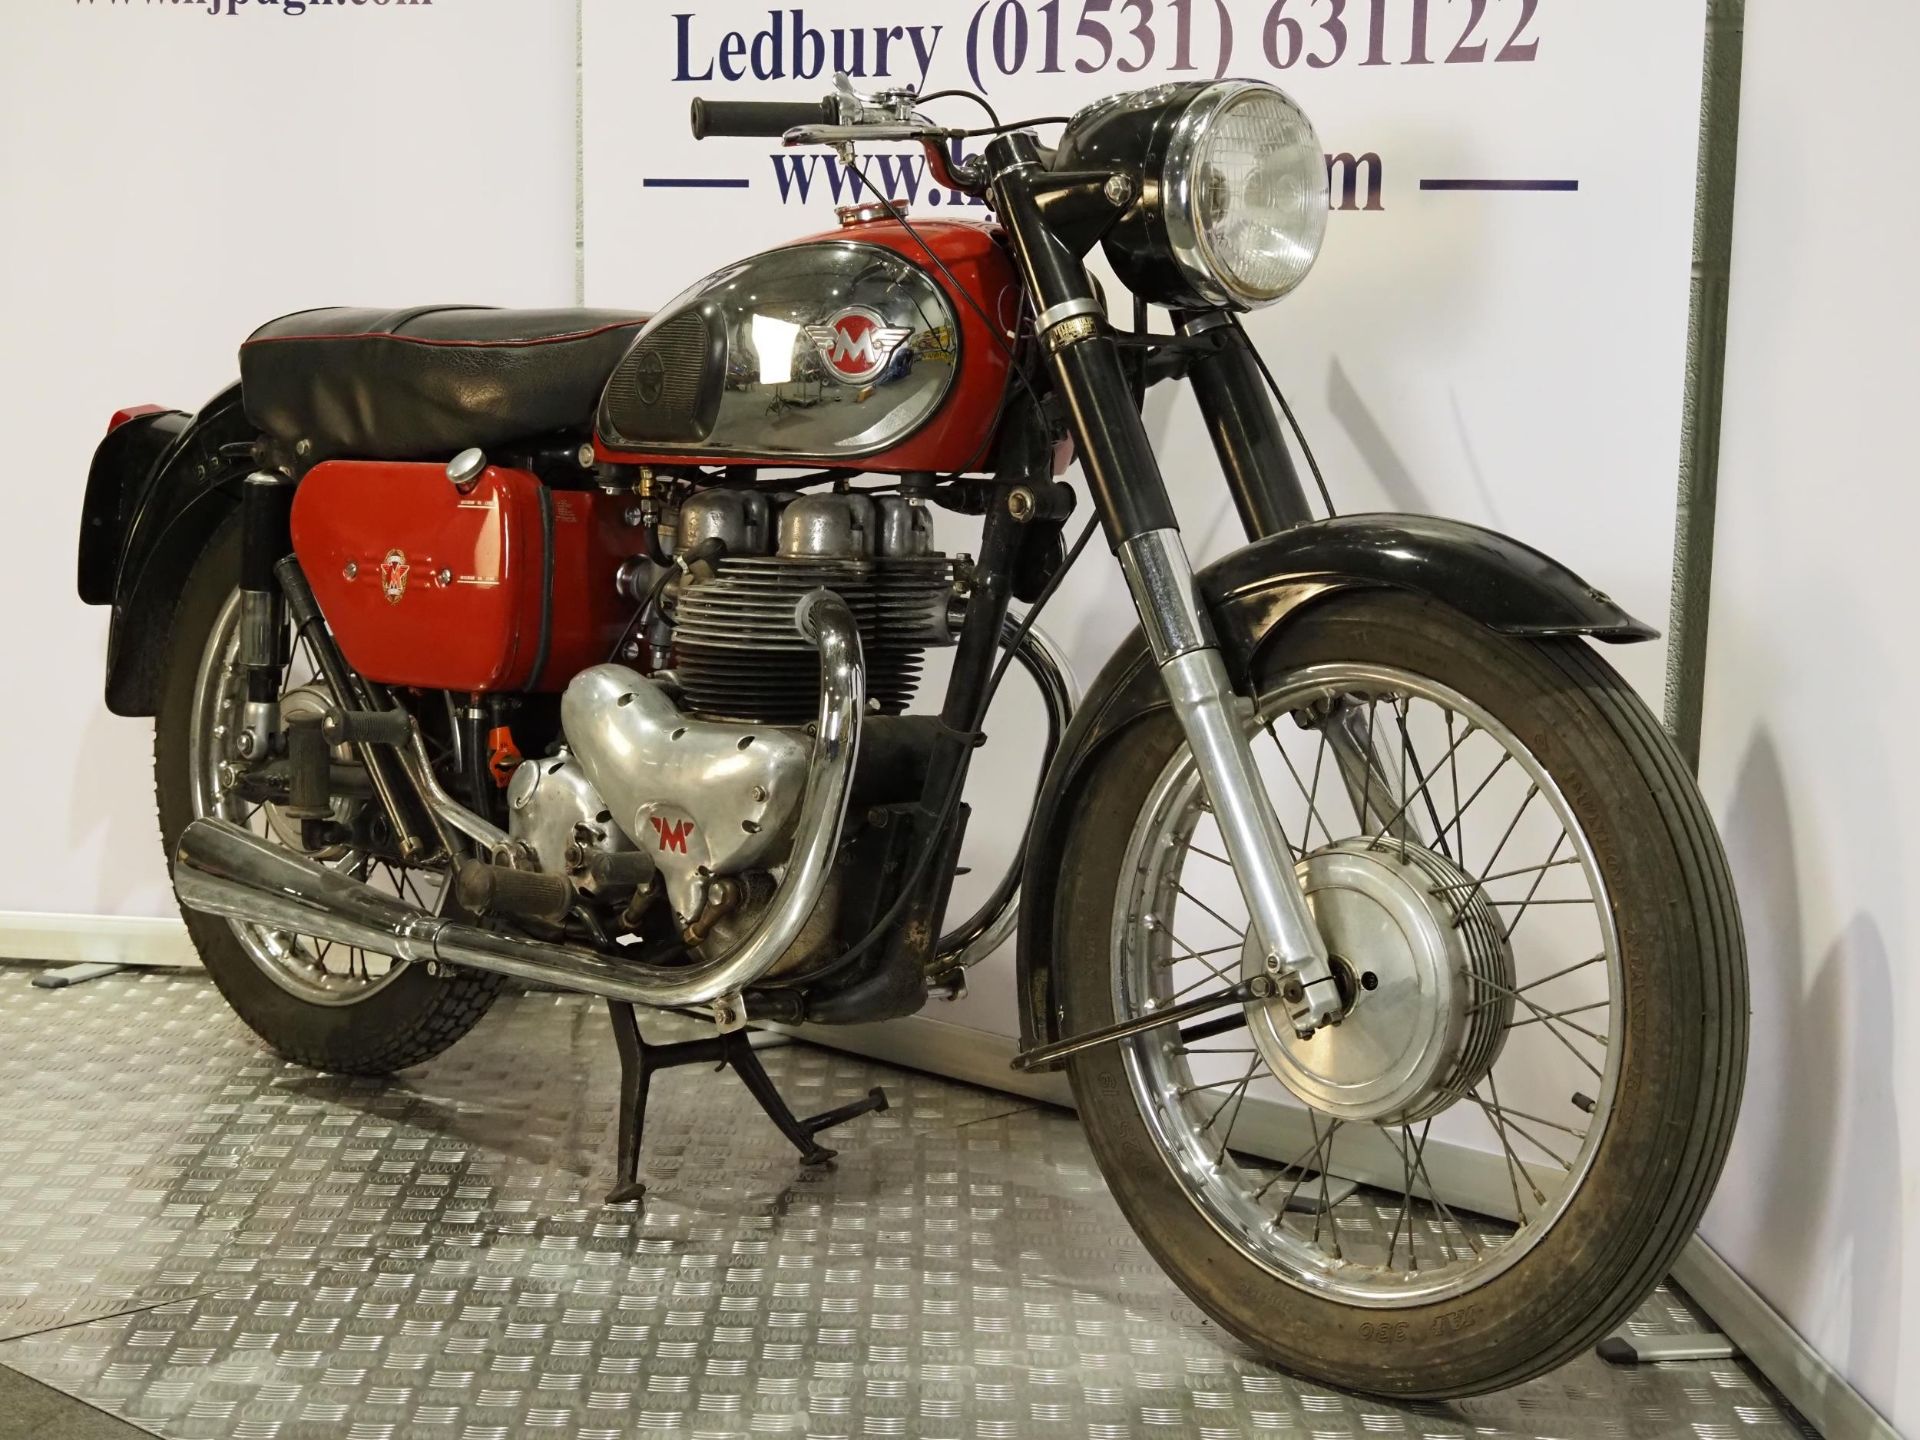 Matchless G11 motorcycle. 1958. 600cc. Frame No. A65717 Engine No. 573005071 Runs and rides. - Image 2 of 6